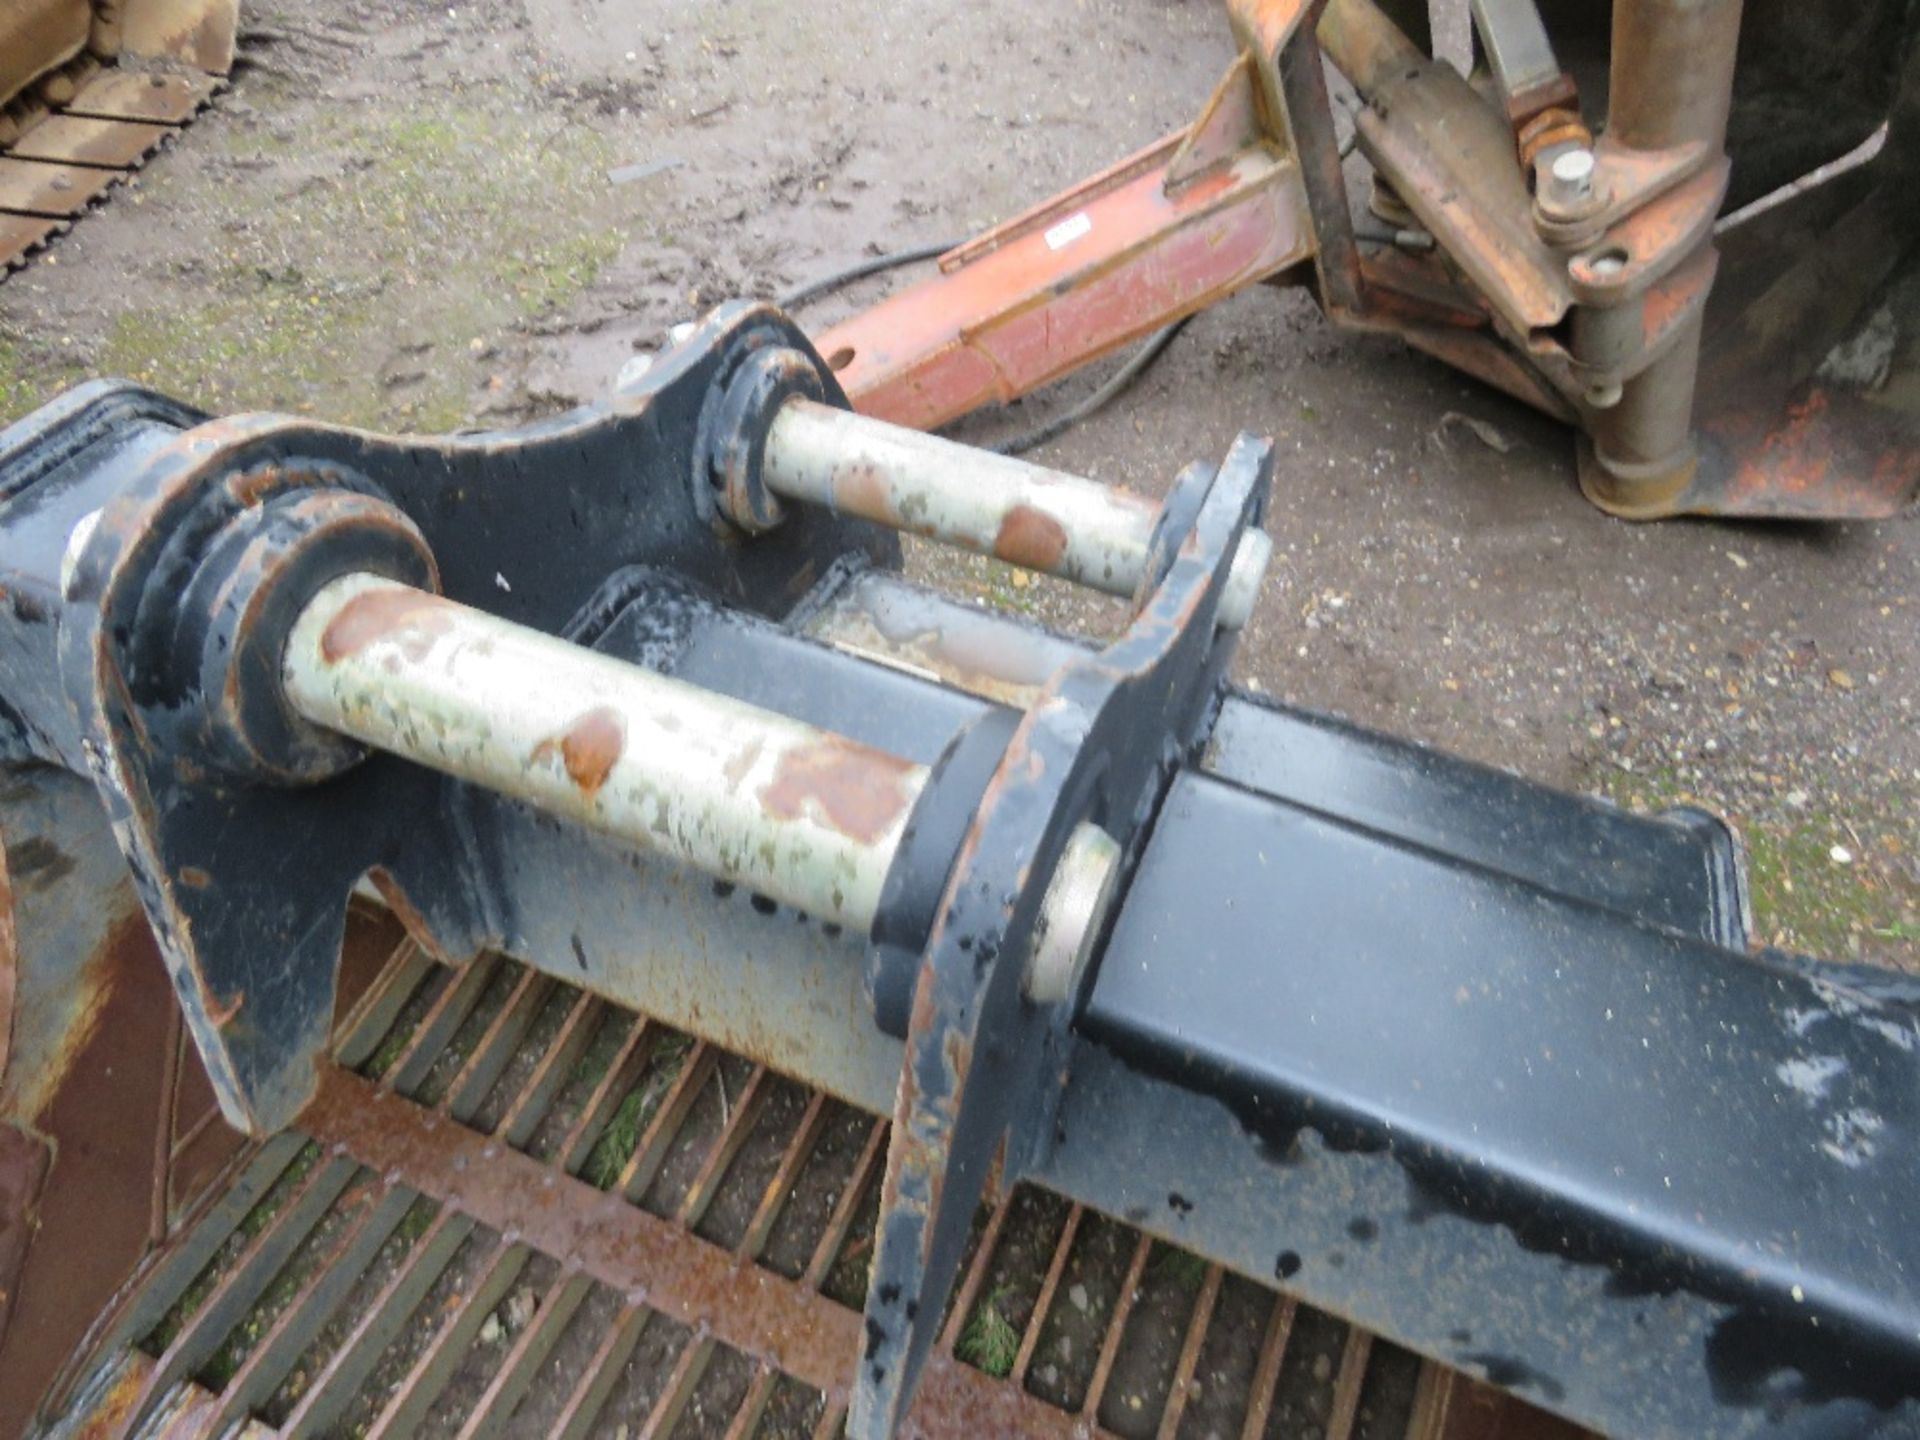 RHINOX 1.2M WIDTH EXCAVATOR MOUNTED RIDDLE BUCKET ON 65MM PINS, LITTLE USED. BEING SOLD AS SURPLUS T - Image 4 of 5